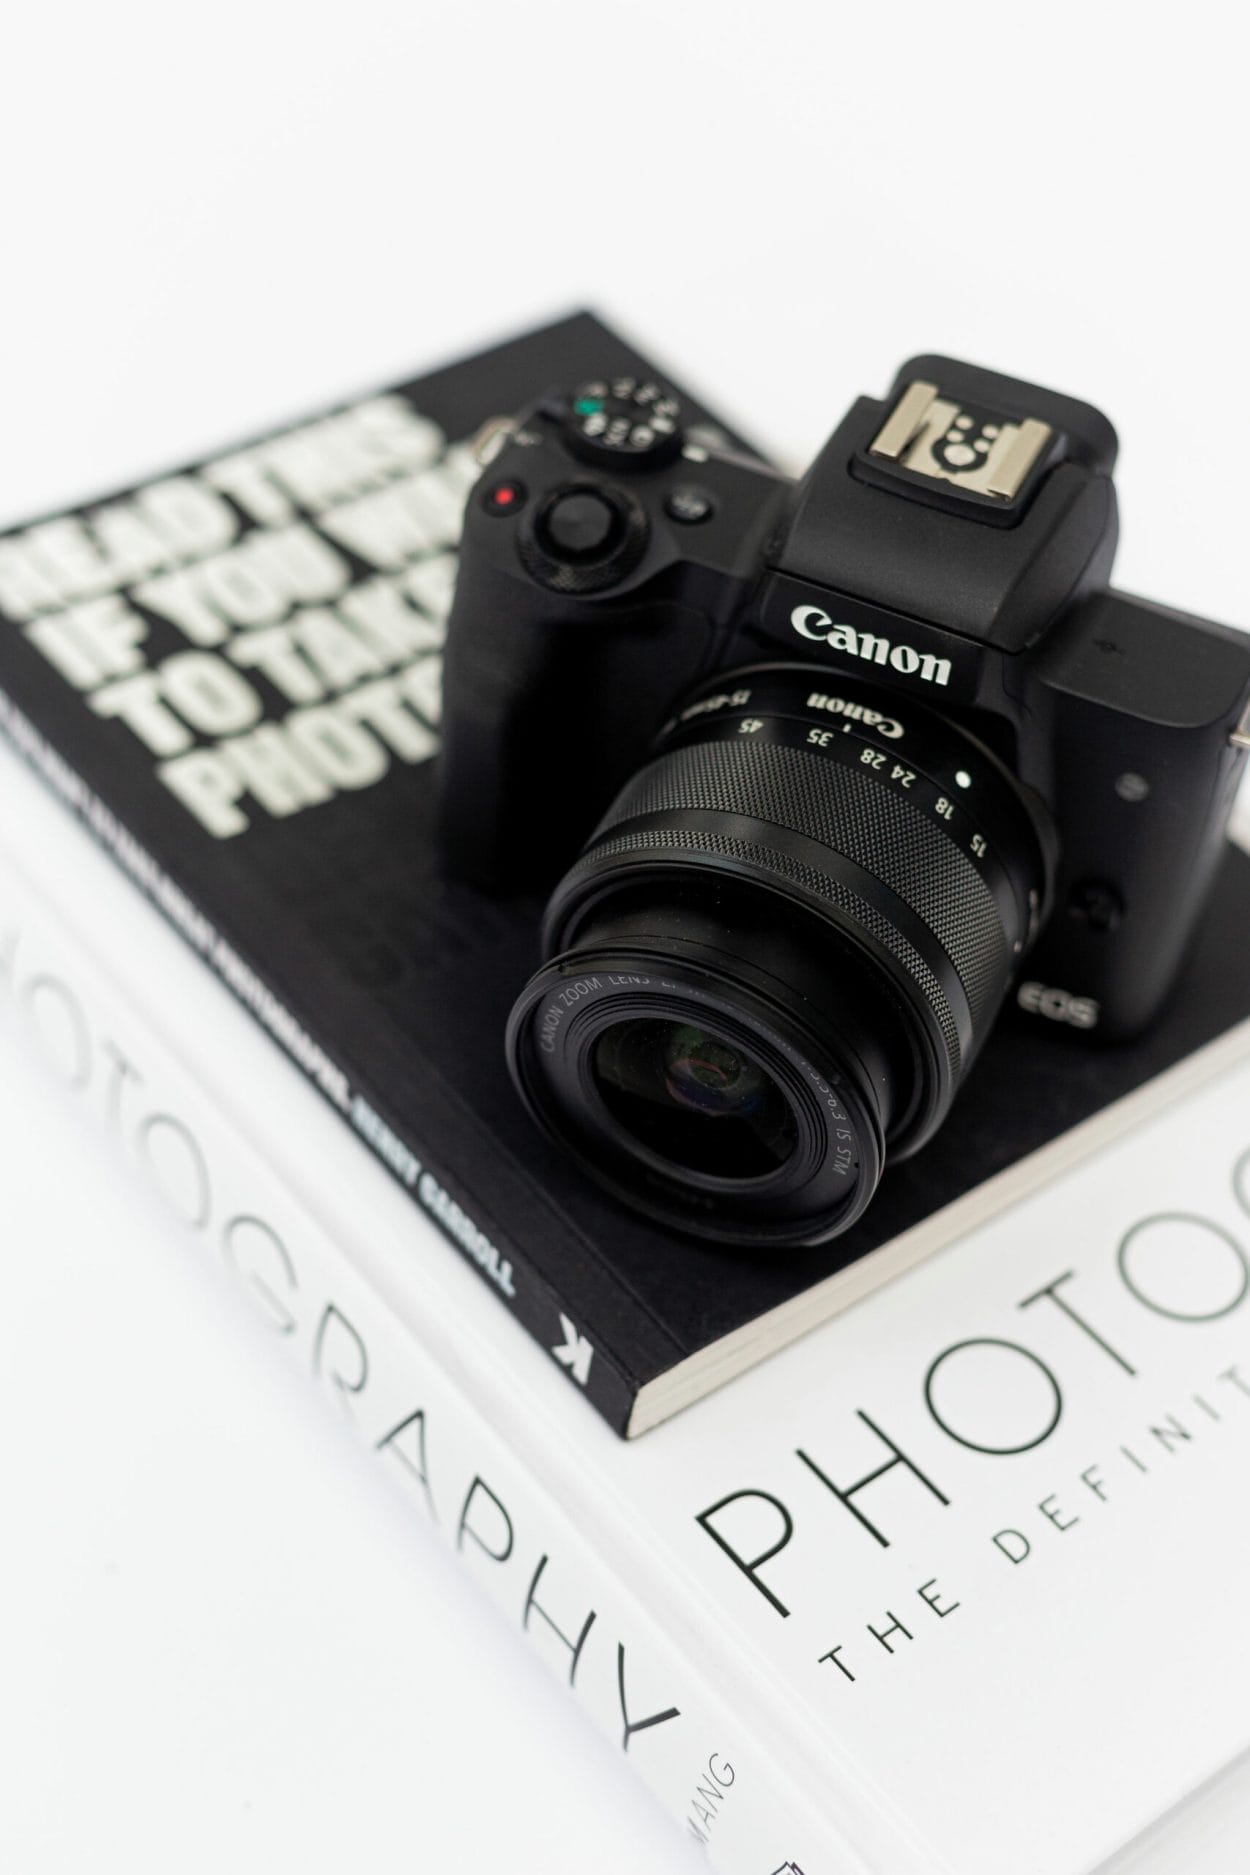 Black and white shot of a Canon camera placed on a stack of art-style books.